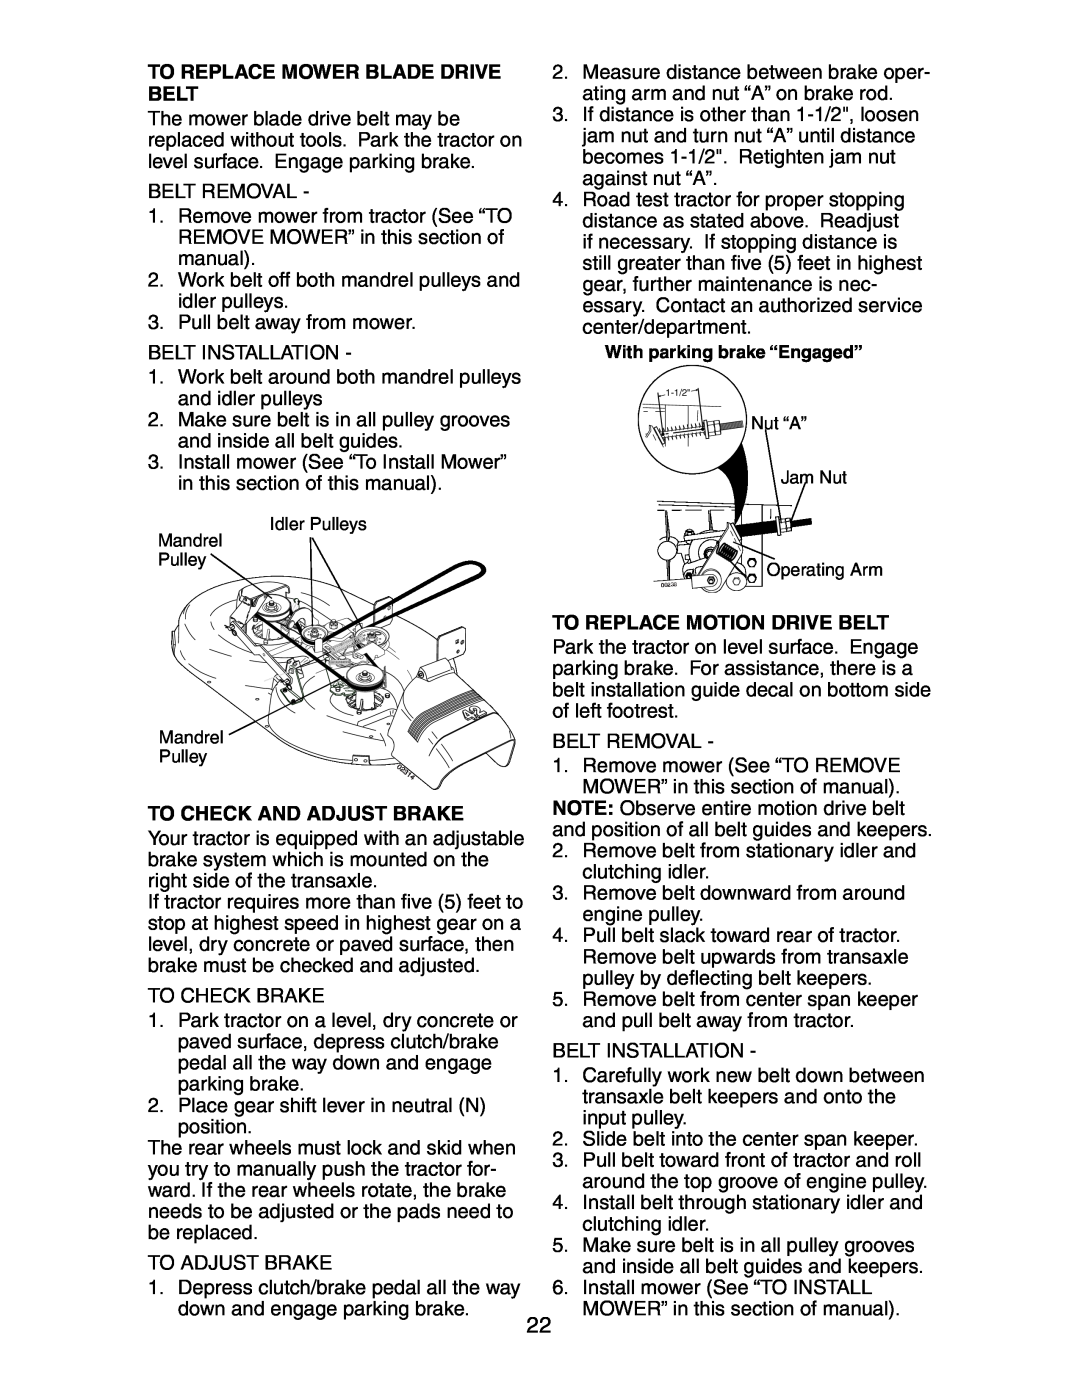 Poulan CN1842STA manual To Replace Mower Blade Drive Belt, To Check And Adjust Brake, To Replace Motion Drive Belt 